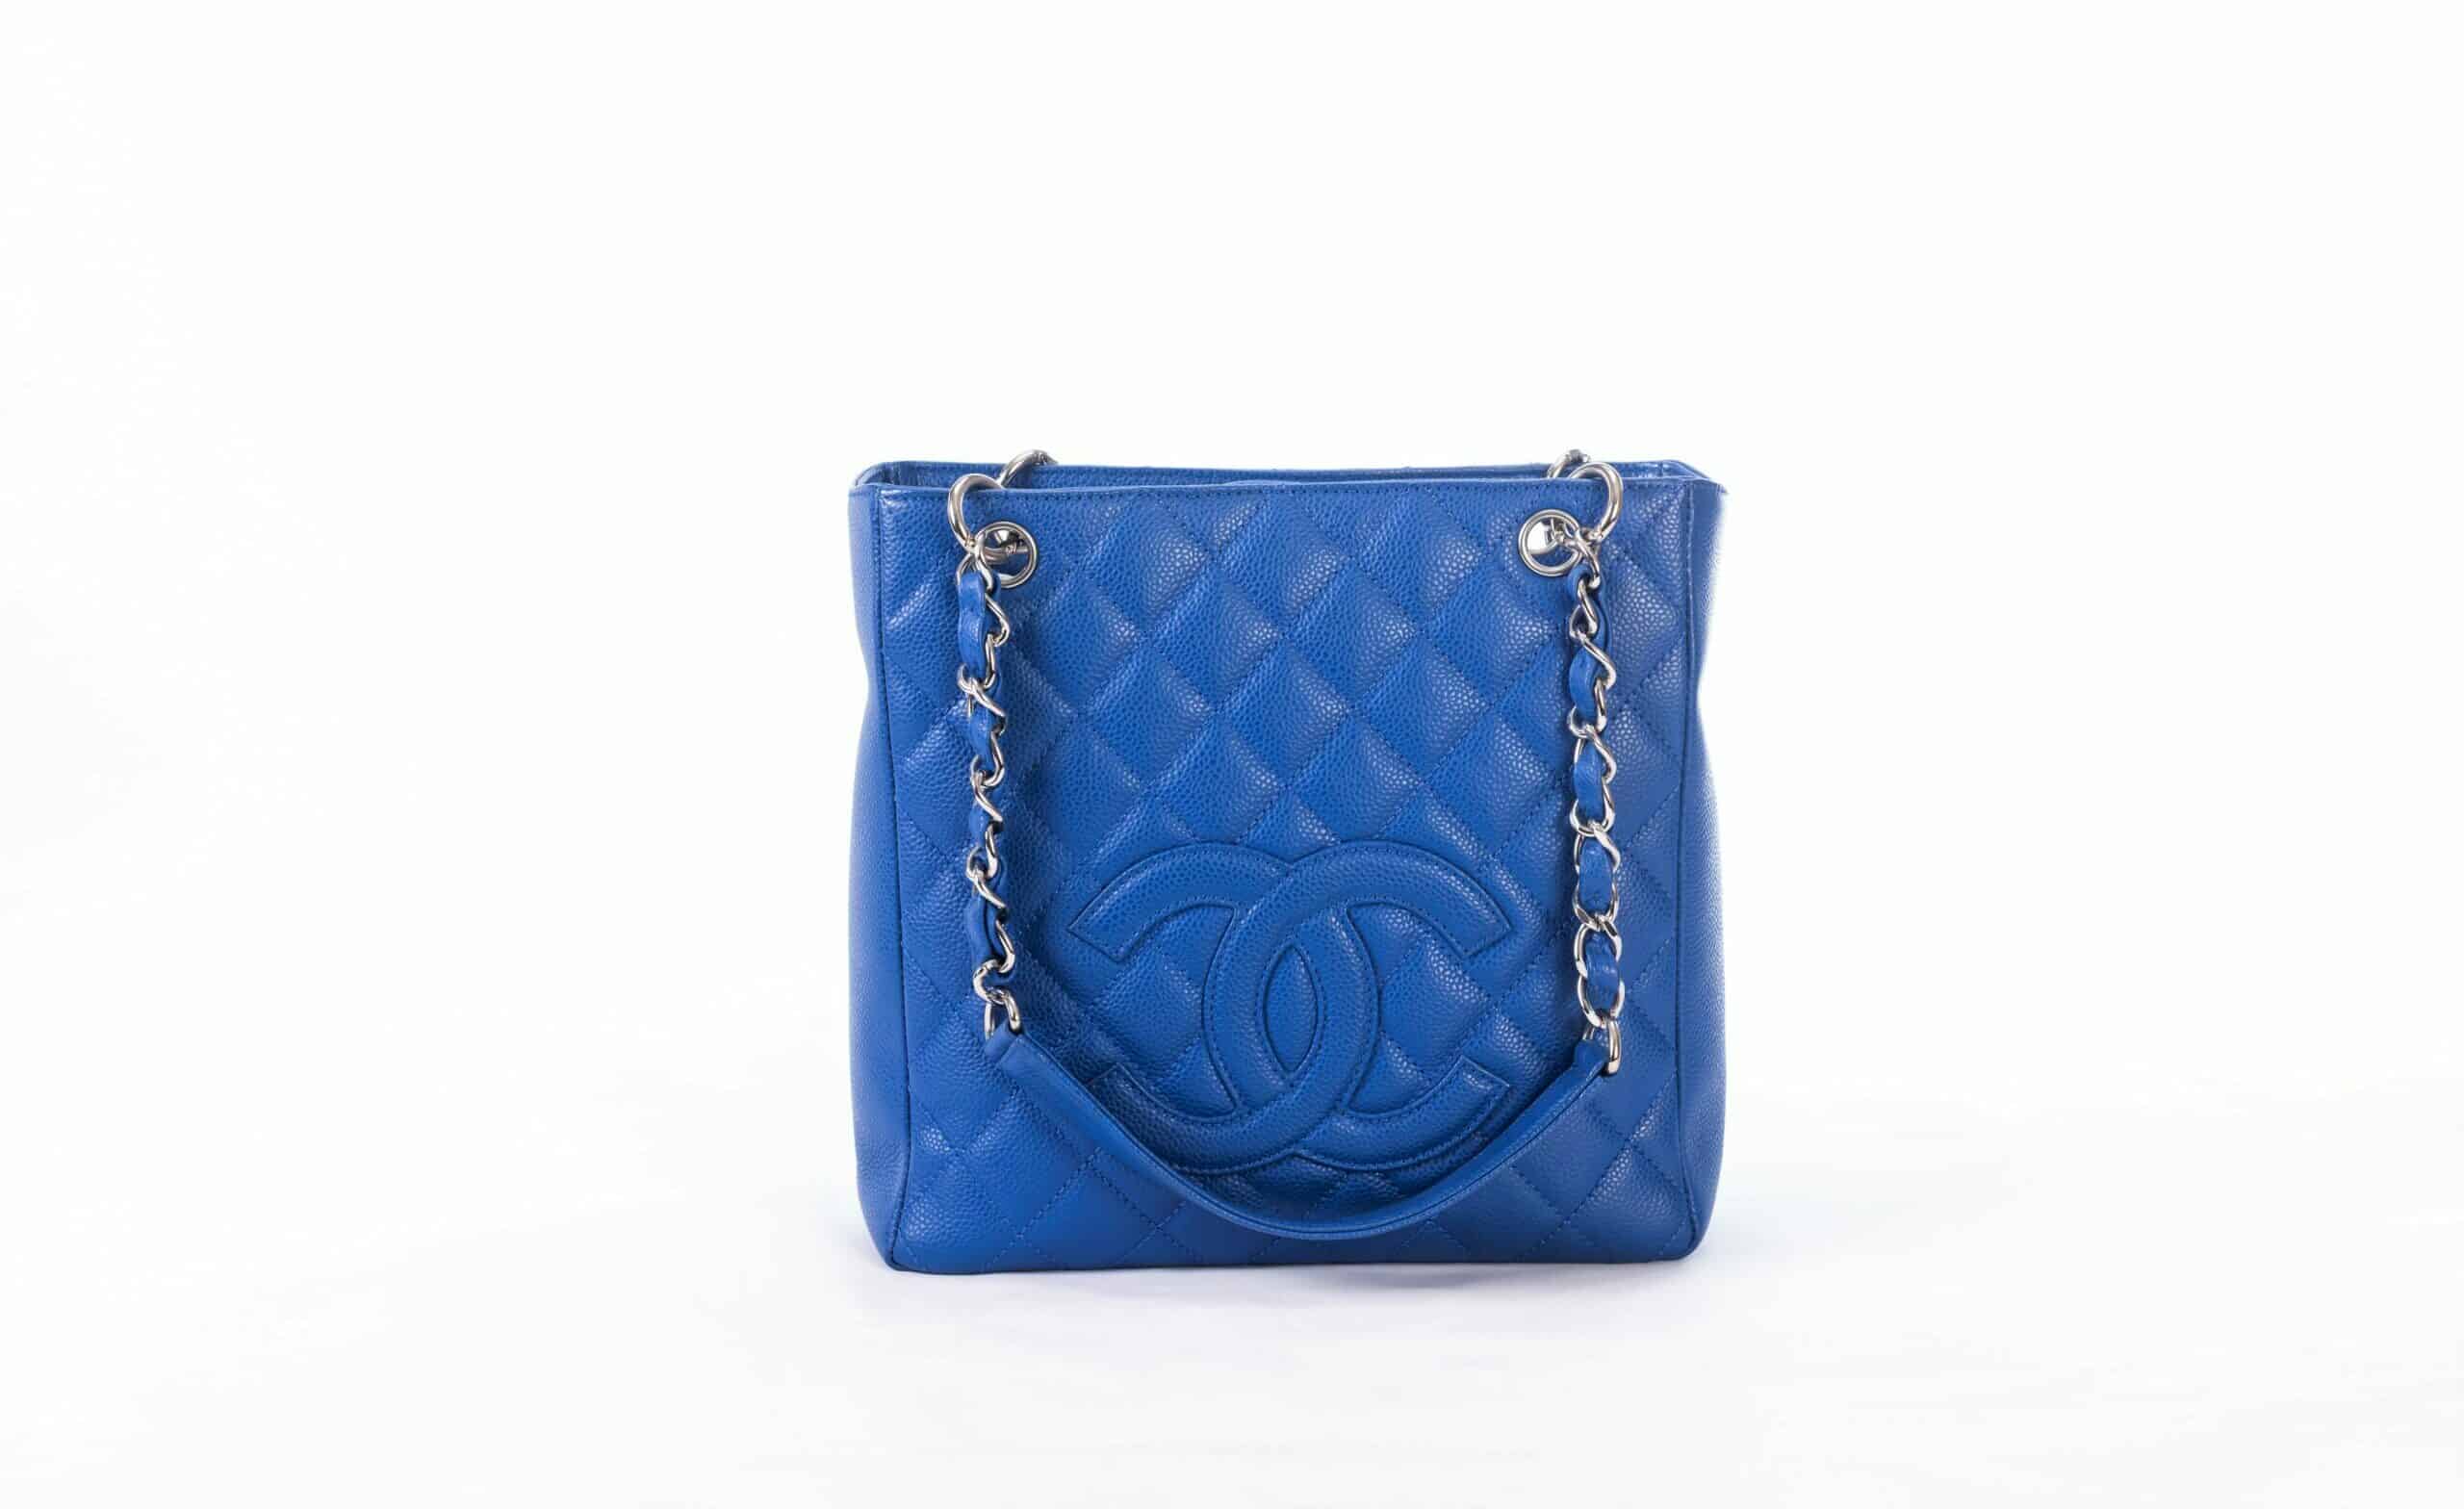 Chanel PST Caviar Quilted Bag in Royal Blue W/ Silver Hardware